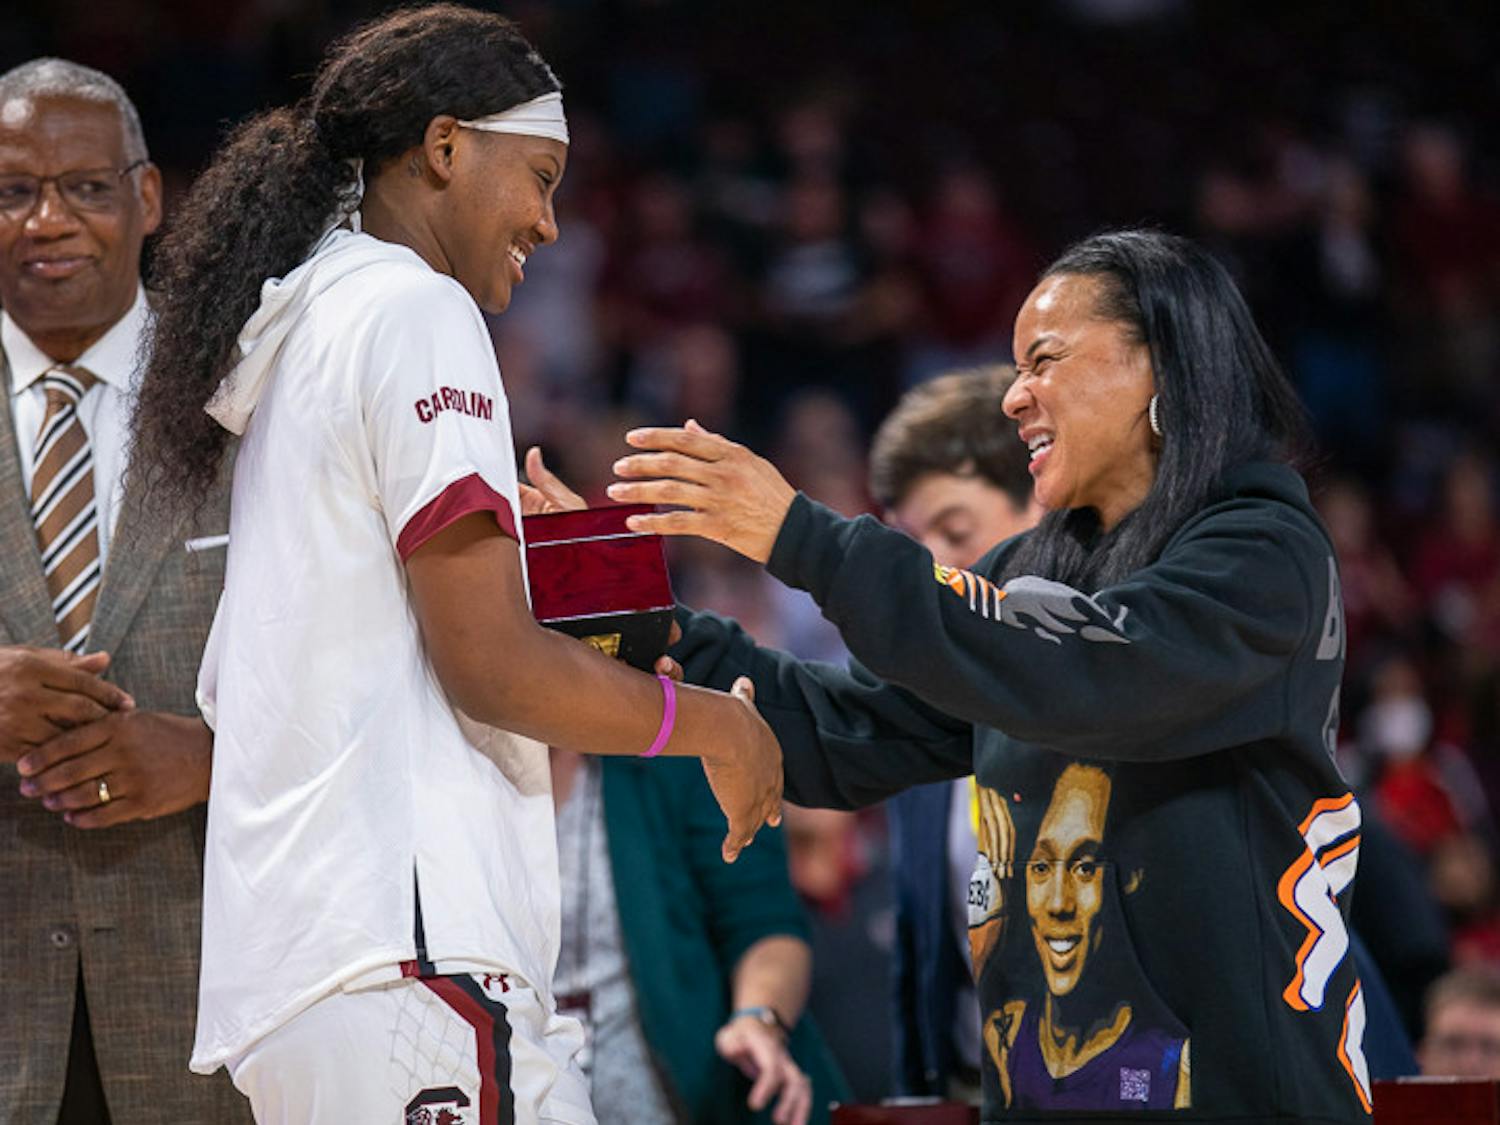 Sophomore forward Sania Feagin (left) and head coach Dawn Staley (right) laugh together after Staley gives Feagin her national championship ring. South Carolina played East Tennessee State on Nov. 7, 2022. The Gamecocks beat the Buccaneers 101- 31.